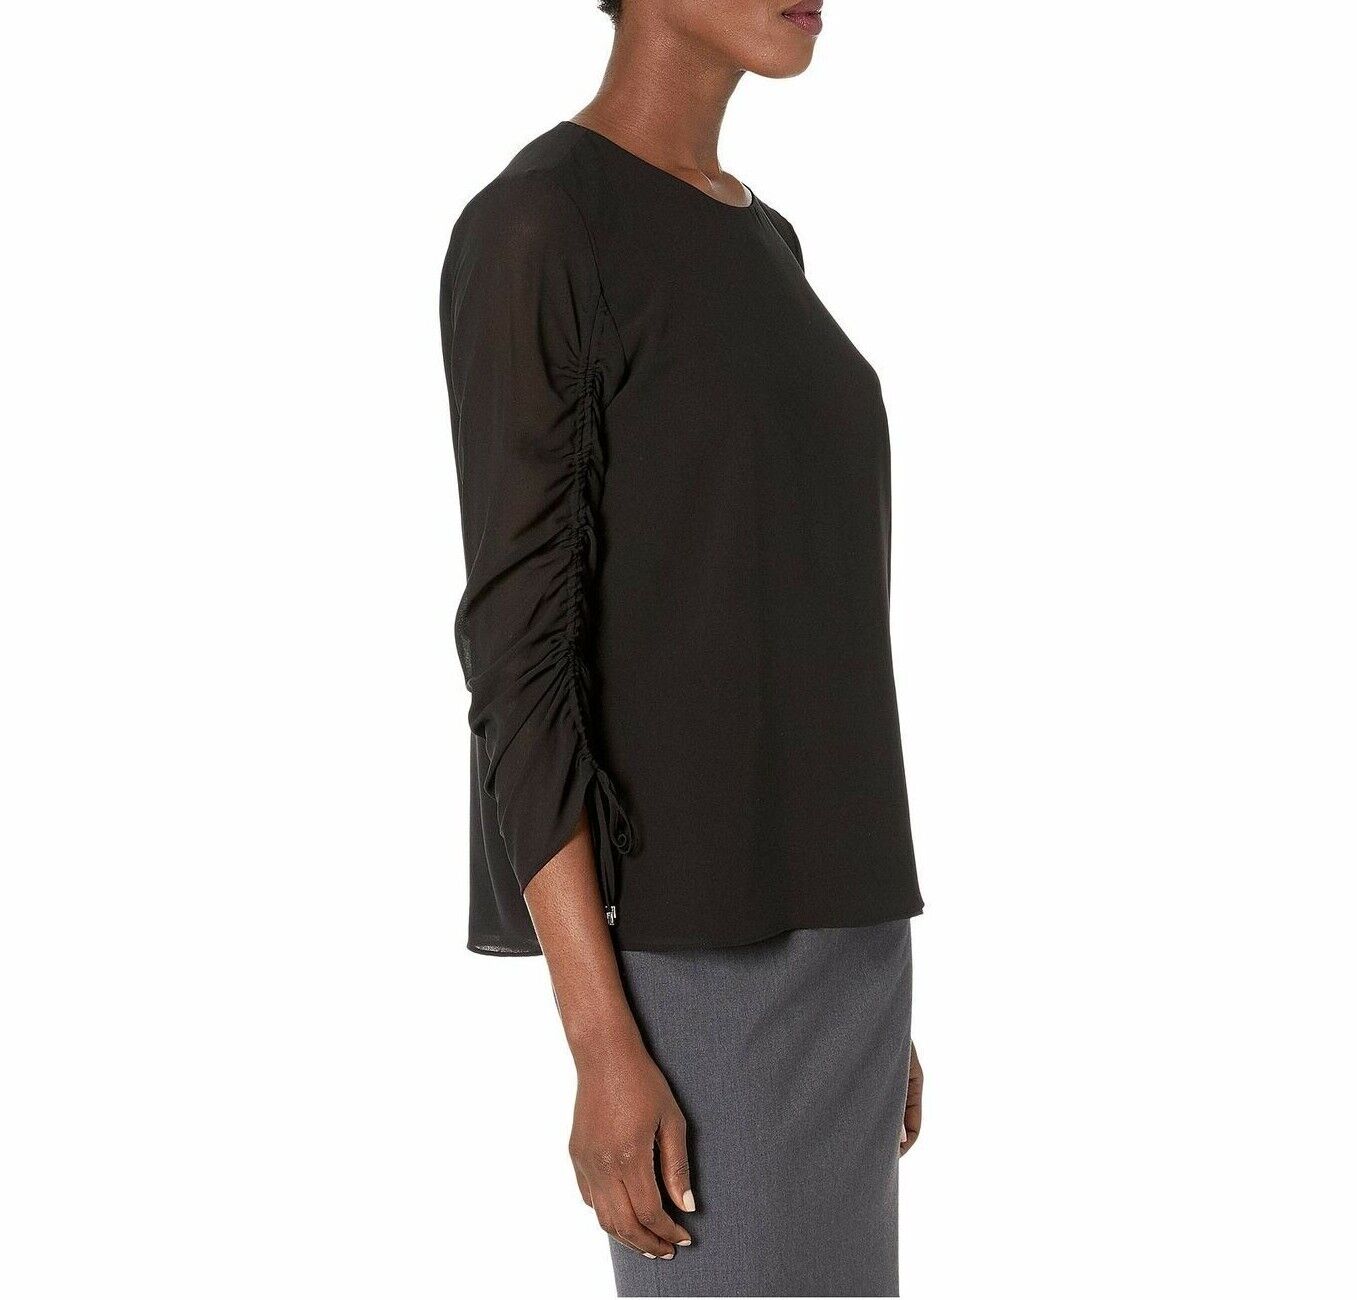 CALVIN KLEIN Women's Black Ruched Sleeved Blouse Top